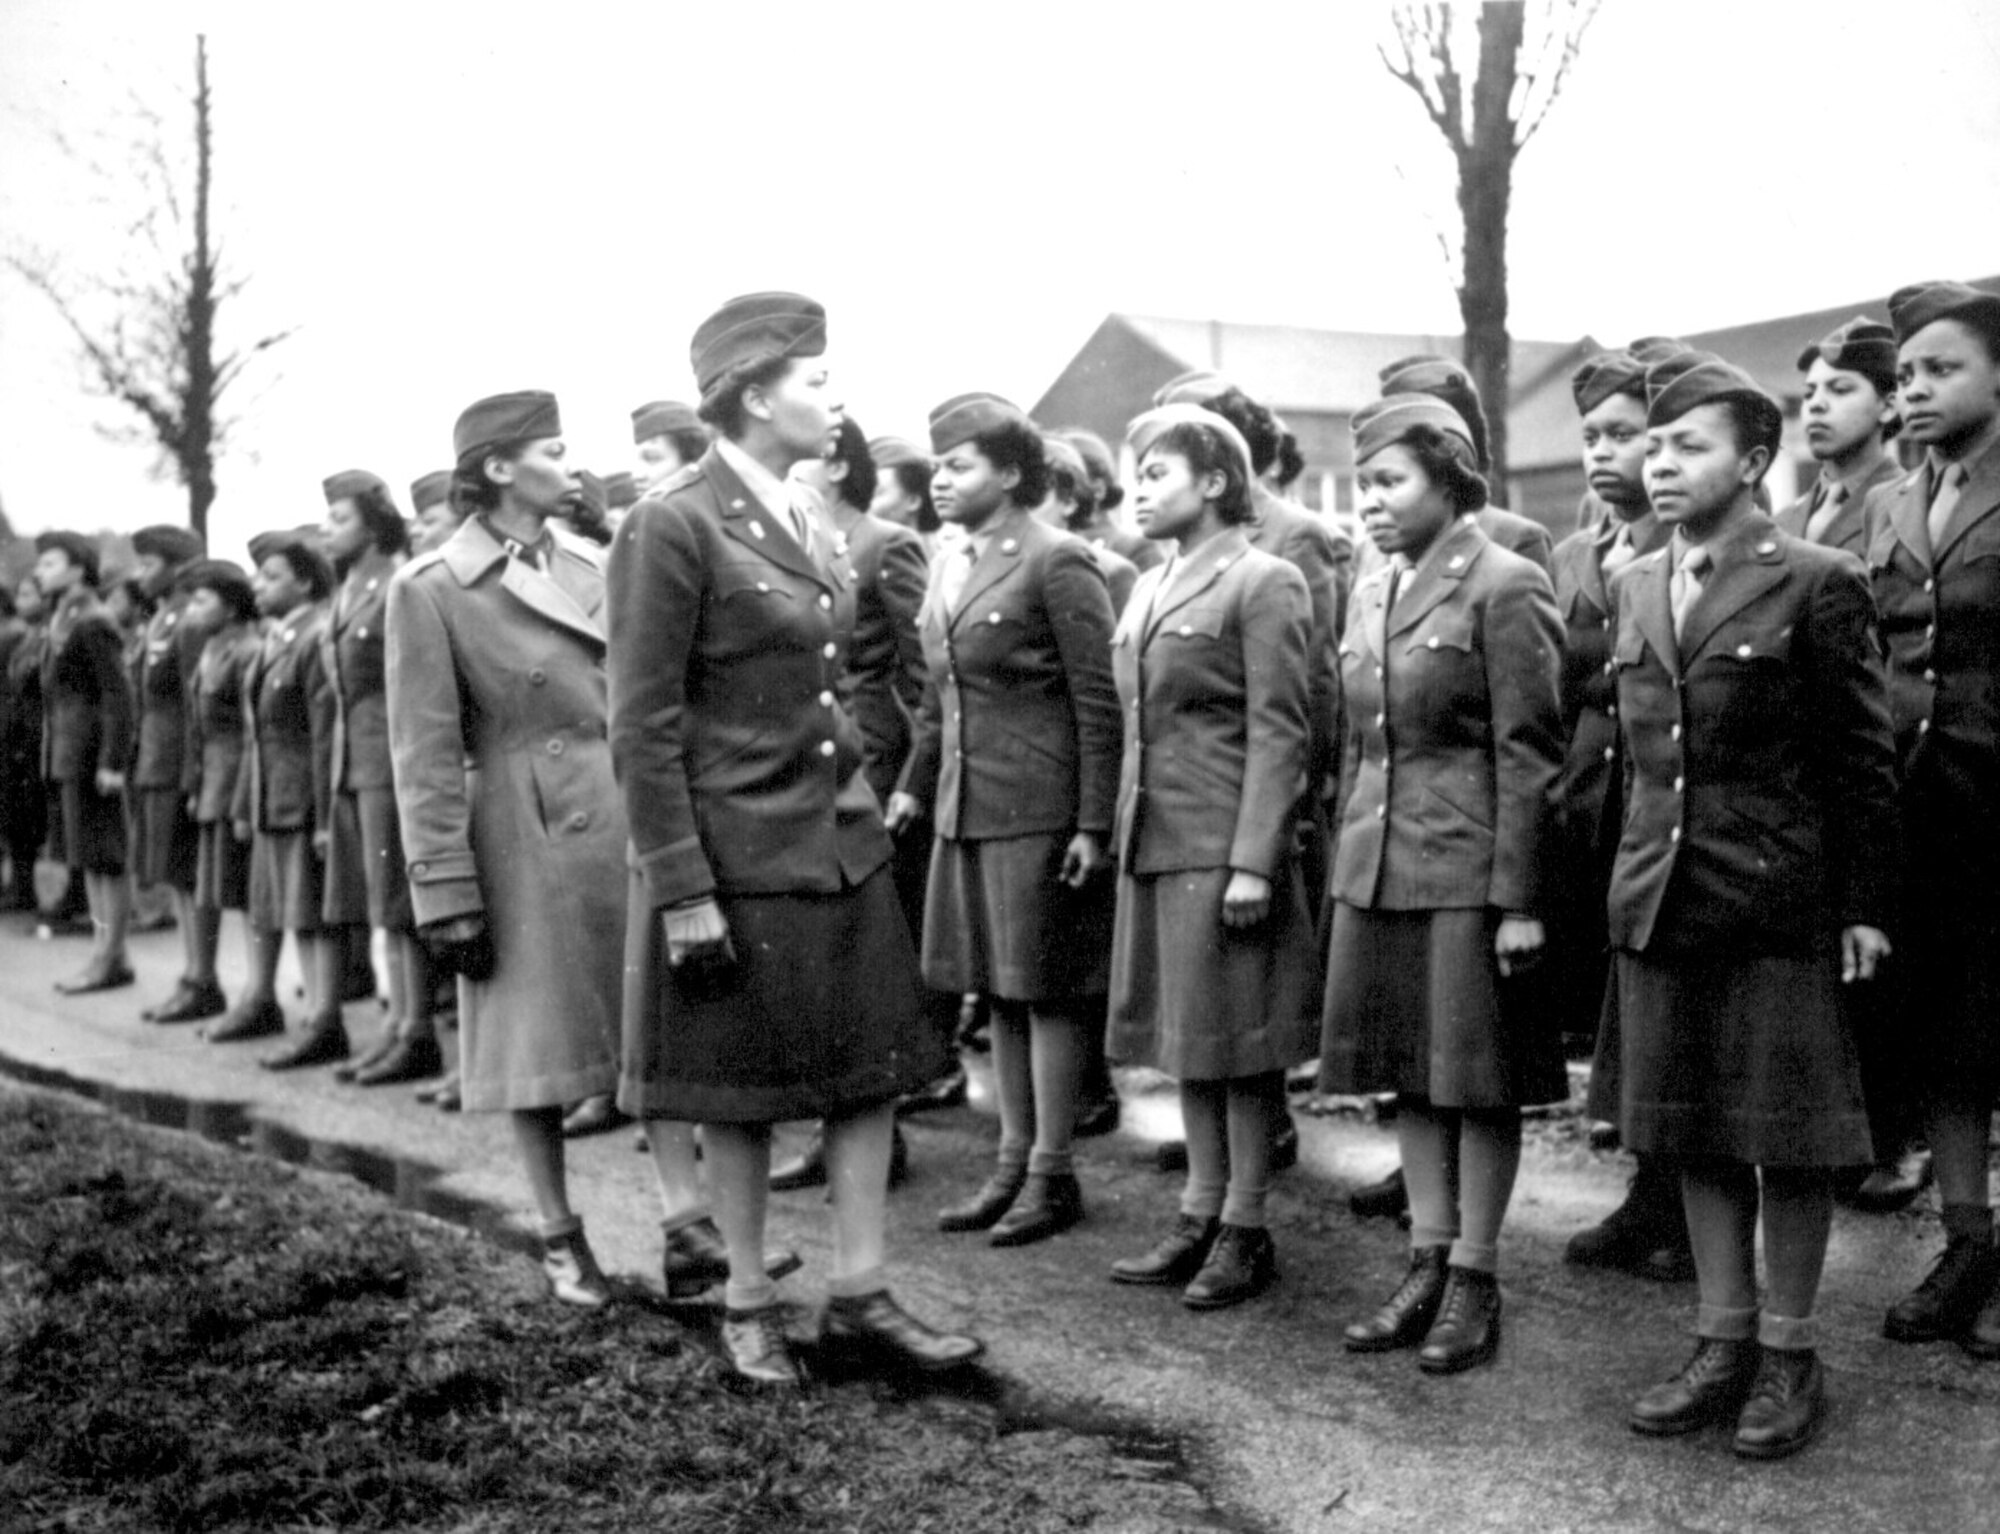 Maj. Charity E. Adams and Capt. Abbie N. Campbell inspect the first contingent of black members of the Women’s Army Corps assigned to overseas service, Feb. 15, 1945, England.